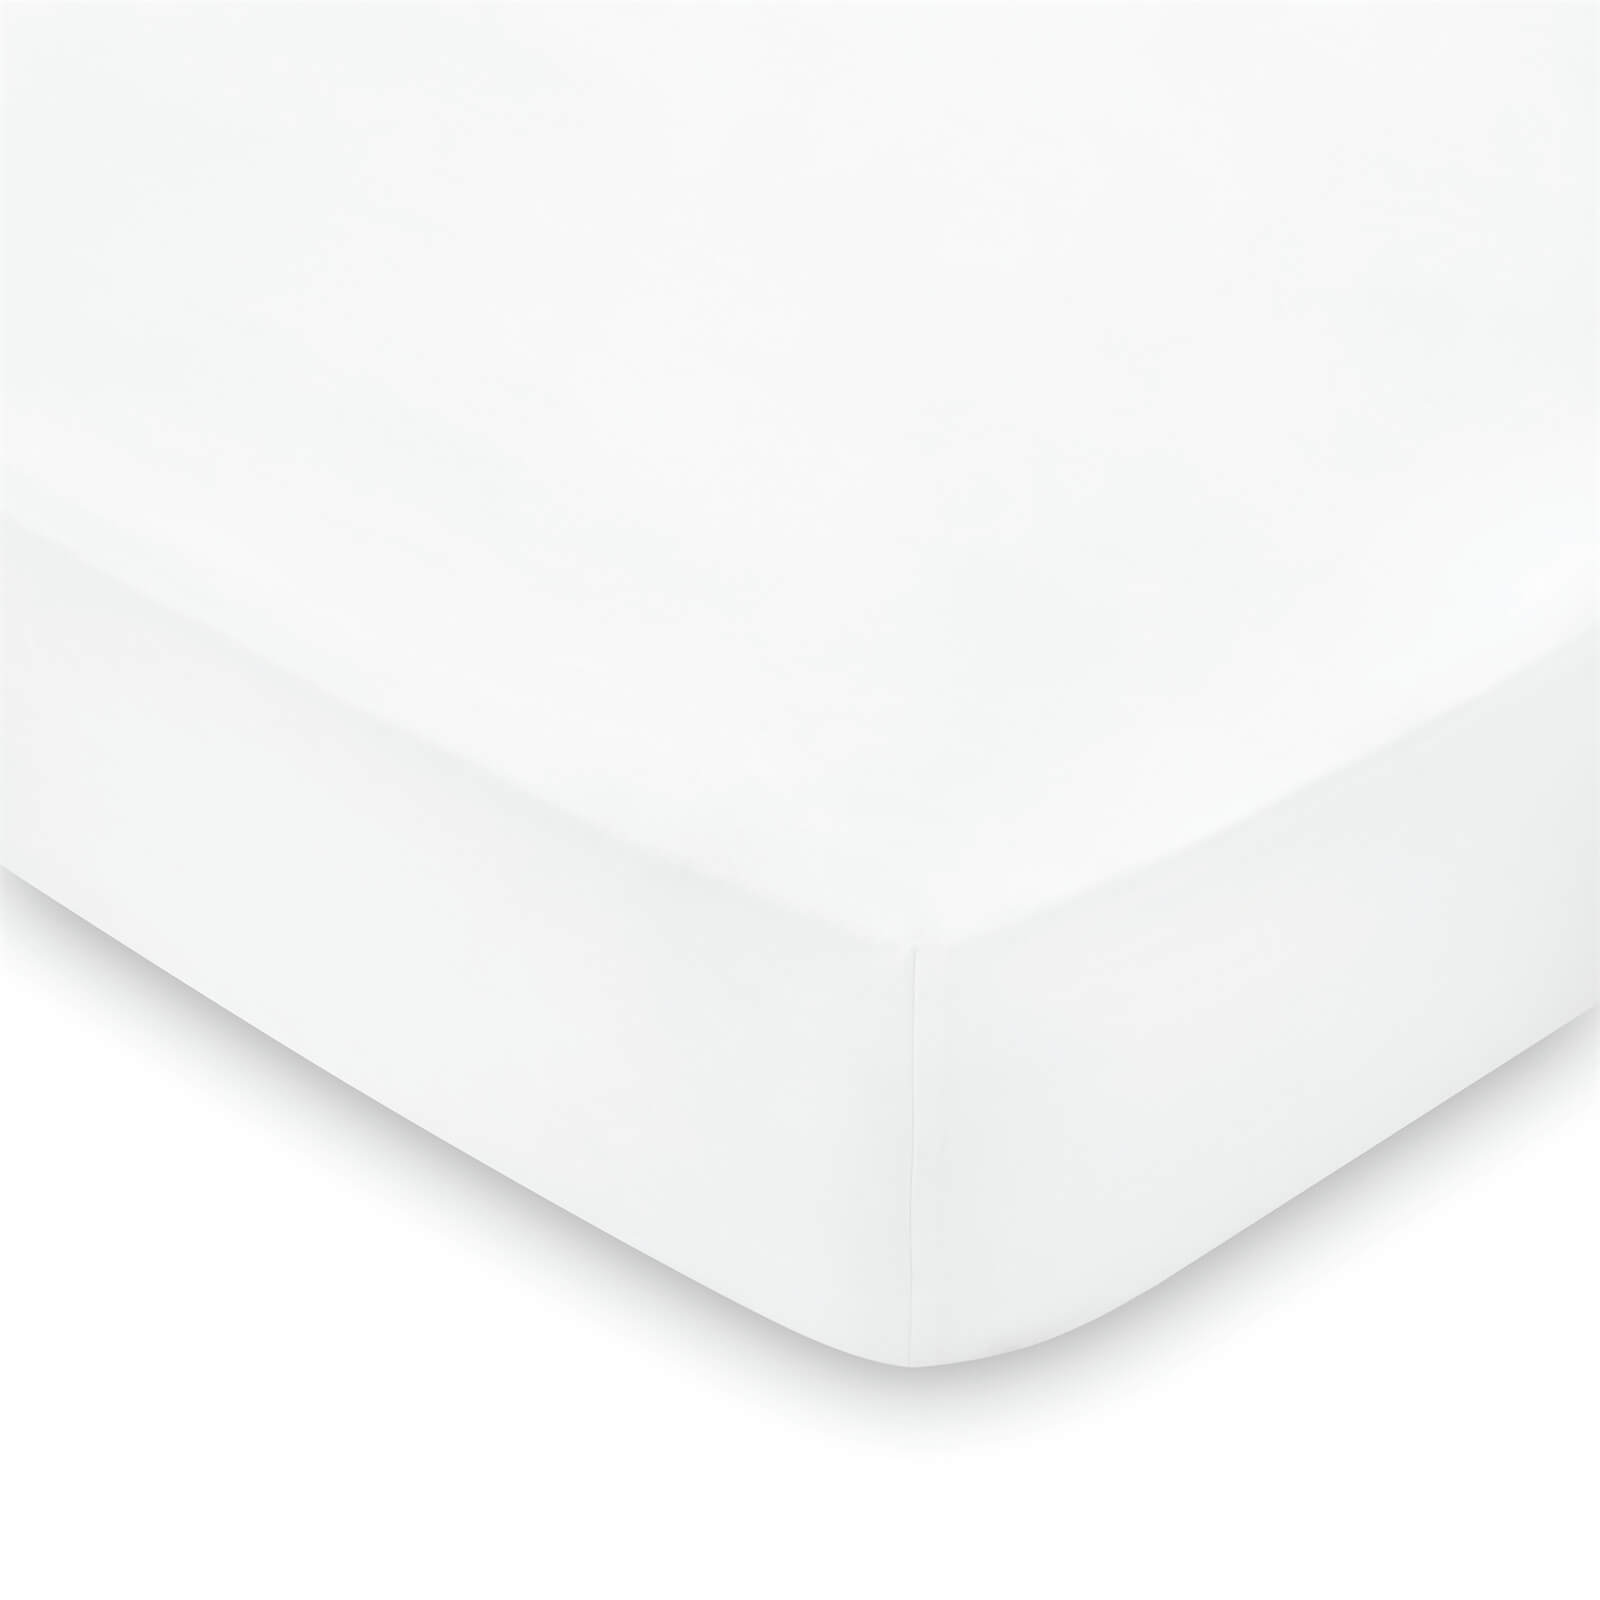 Peacock Blue Hotel 600 Thread Count Plain Dye Fitted Sheet - King - White